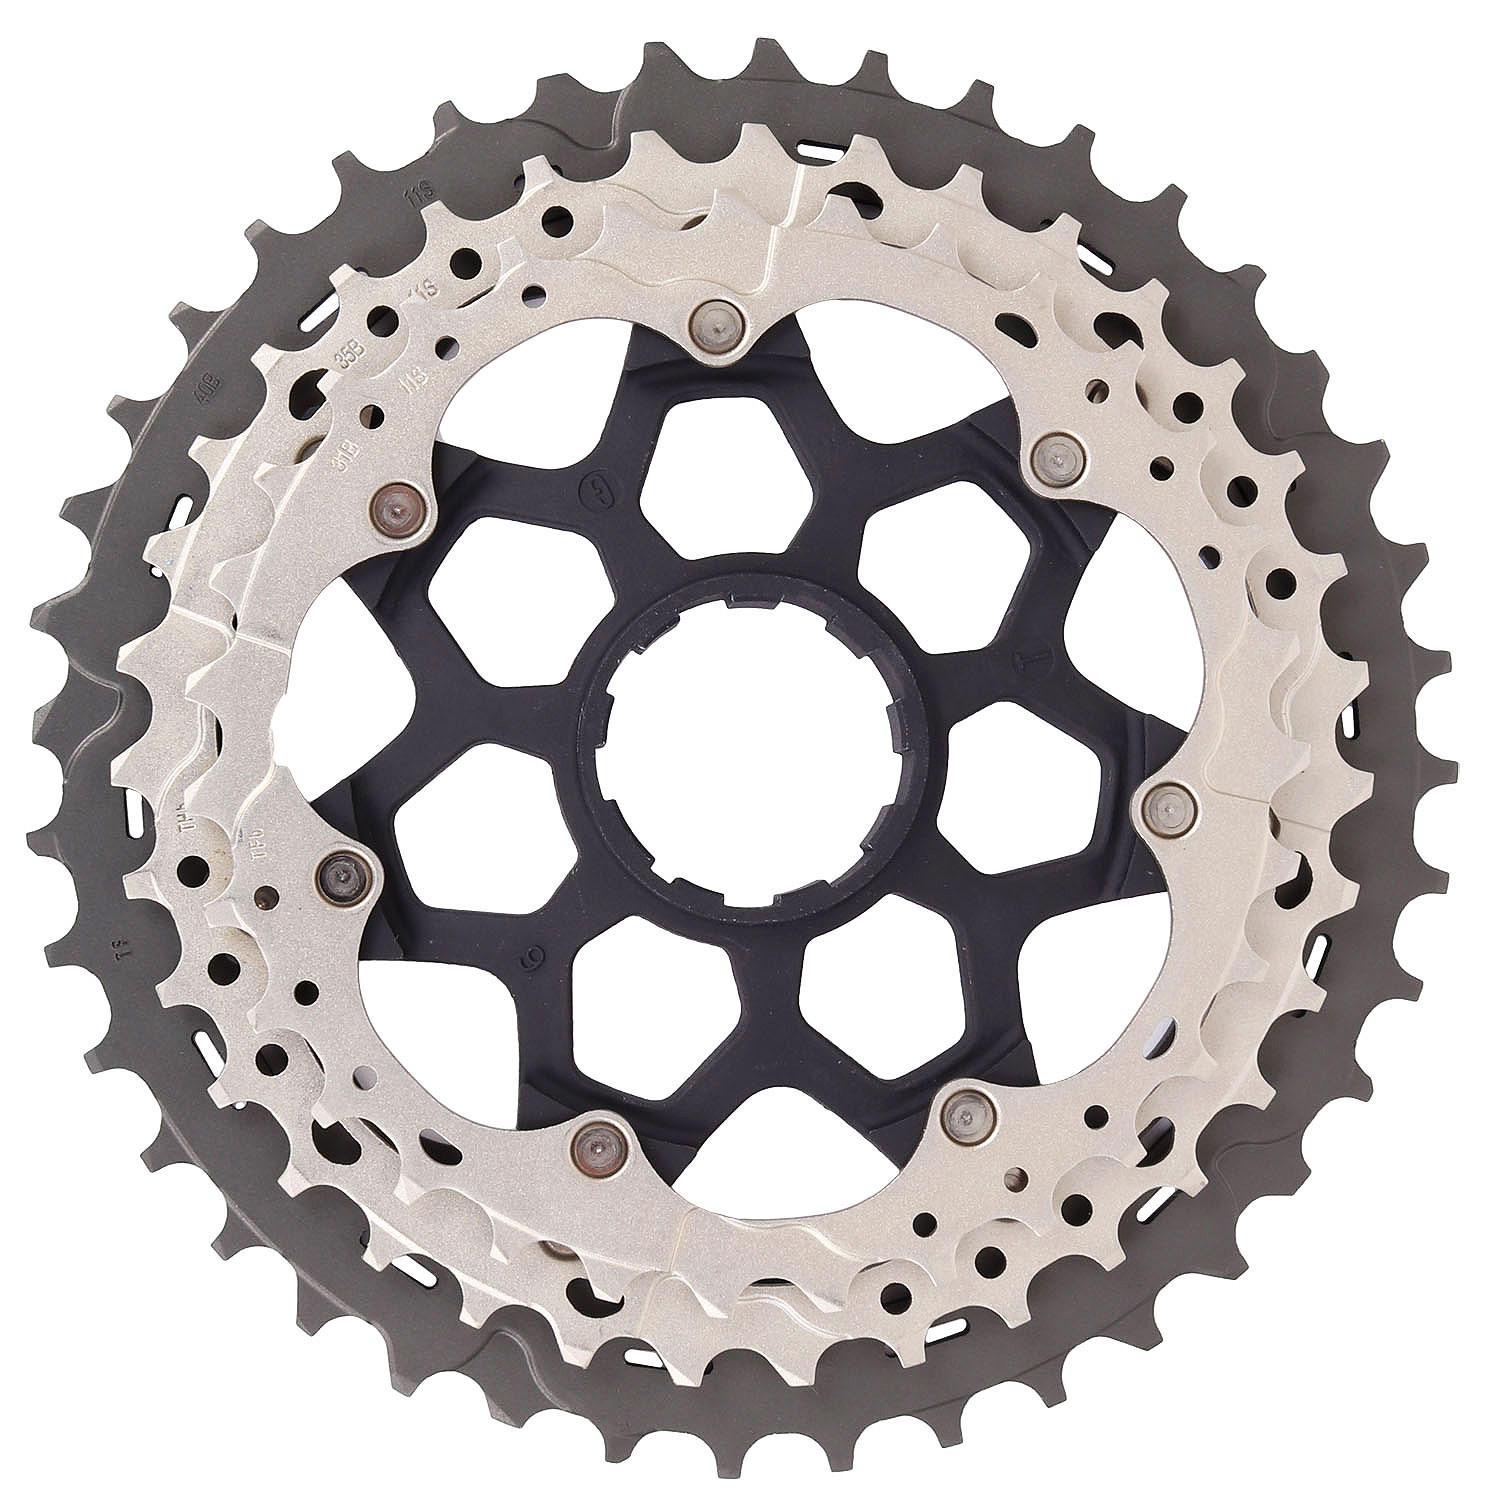 Picture of Shimano Sprocket for Deore XT / SLX 11-speed Cassette - 31/35/40 teeth for 11-40 (Y1VN98020) - CS-M7000